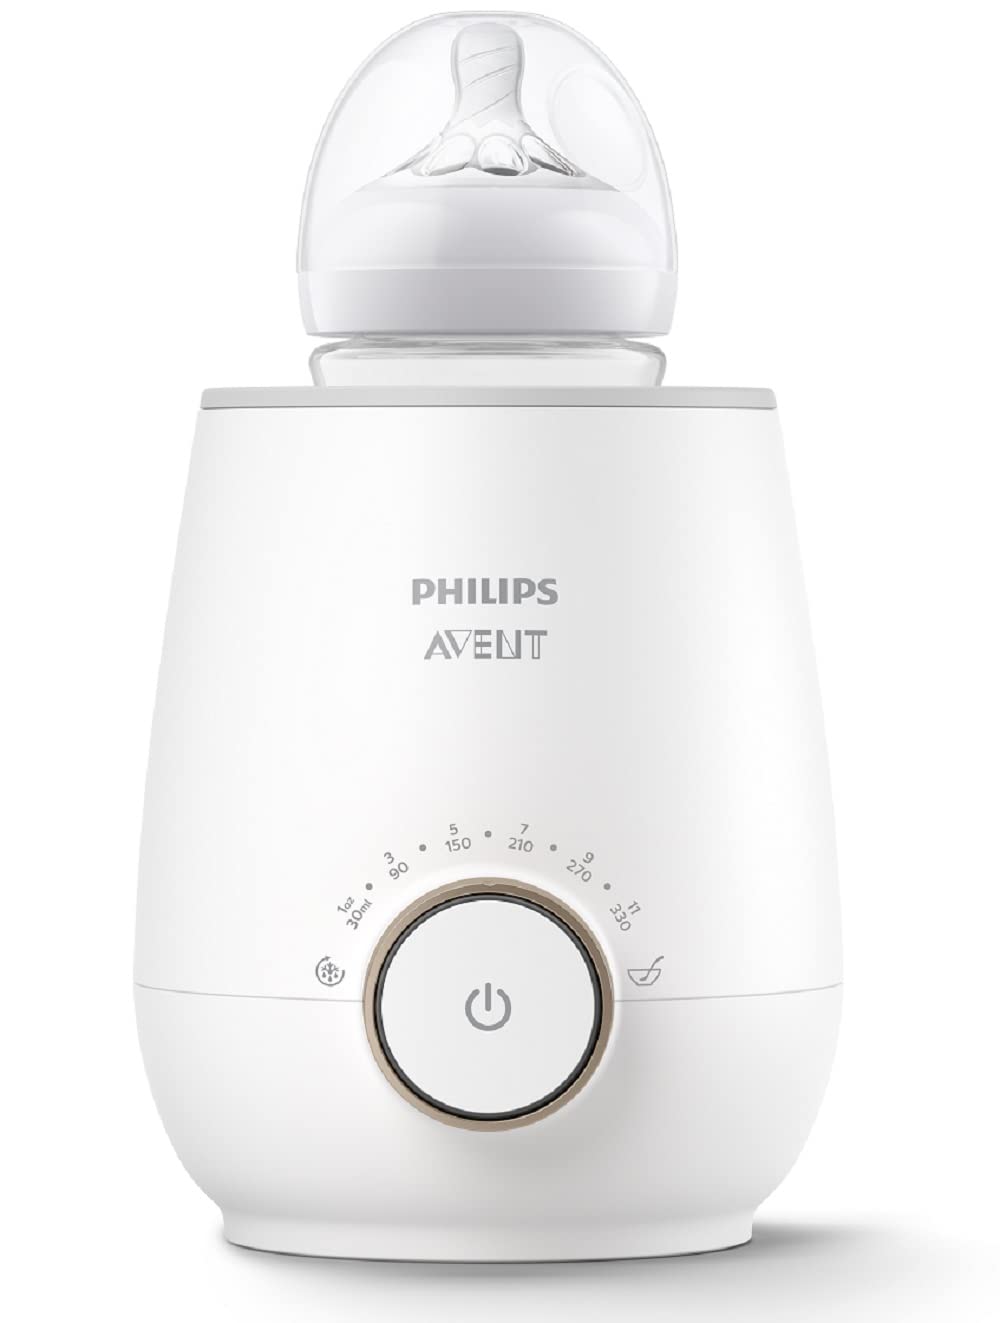 Fast Baby Bottle Warmer with Smart Temperature Control